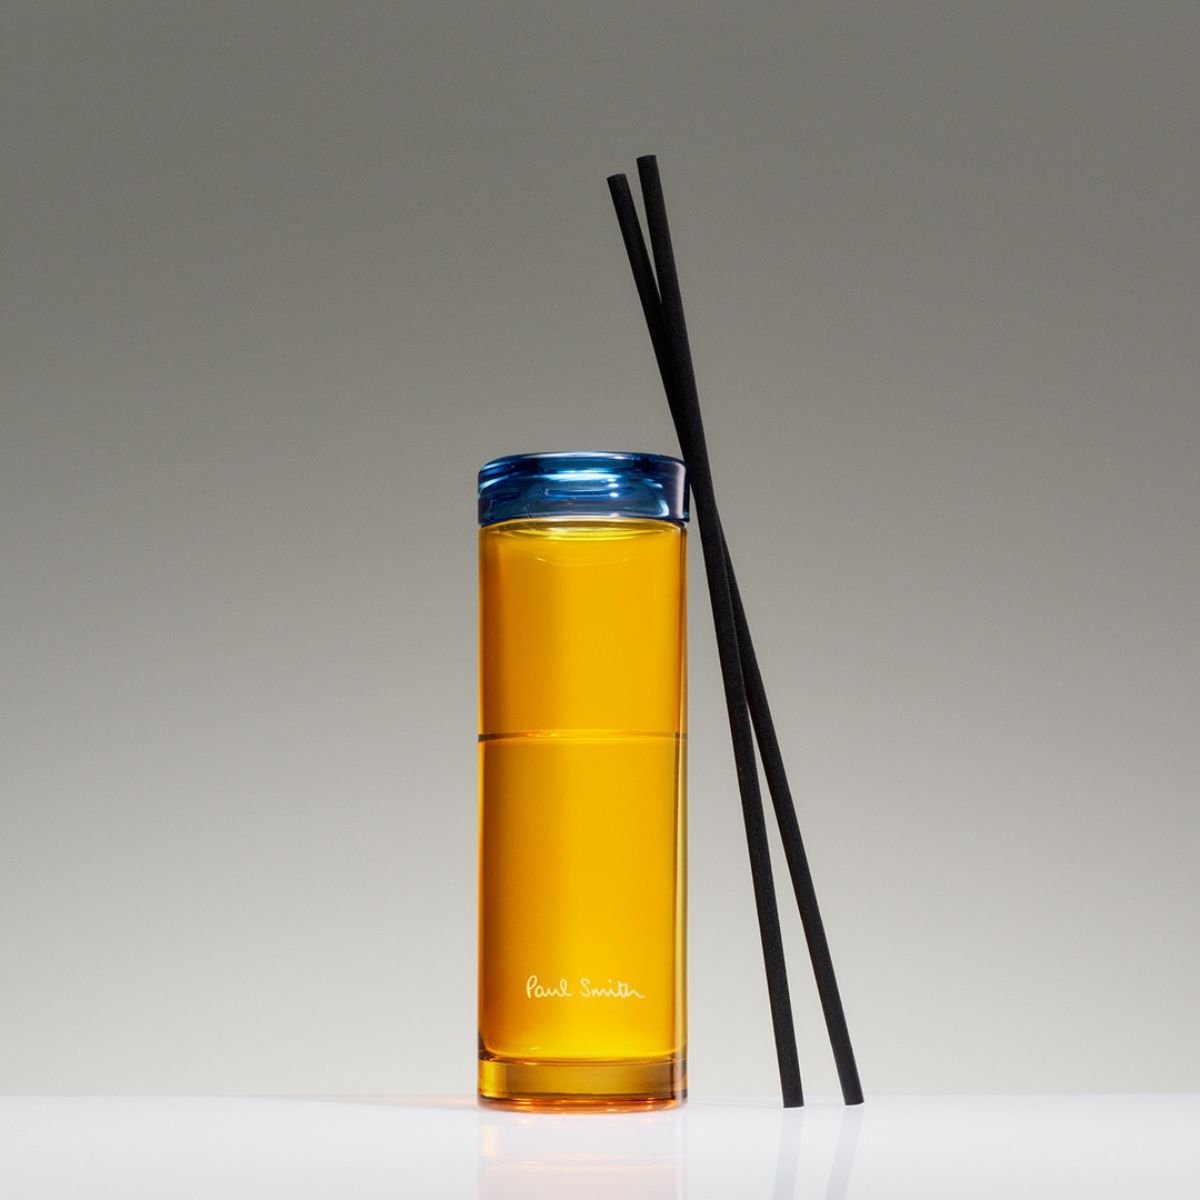 Image of Daydreamer reed diffuser by Paul Smith